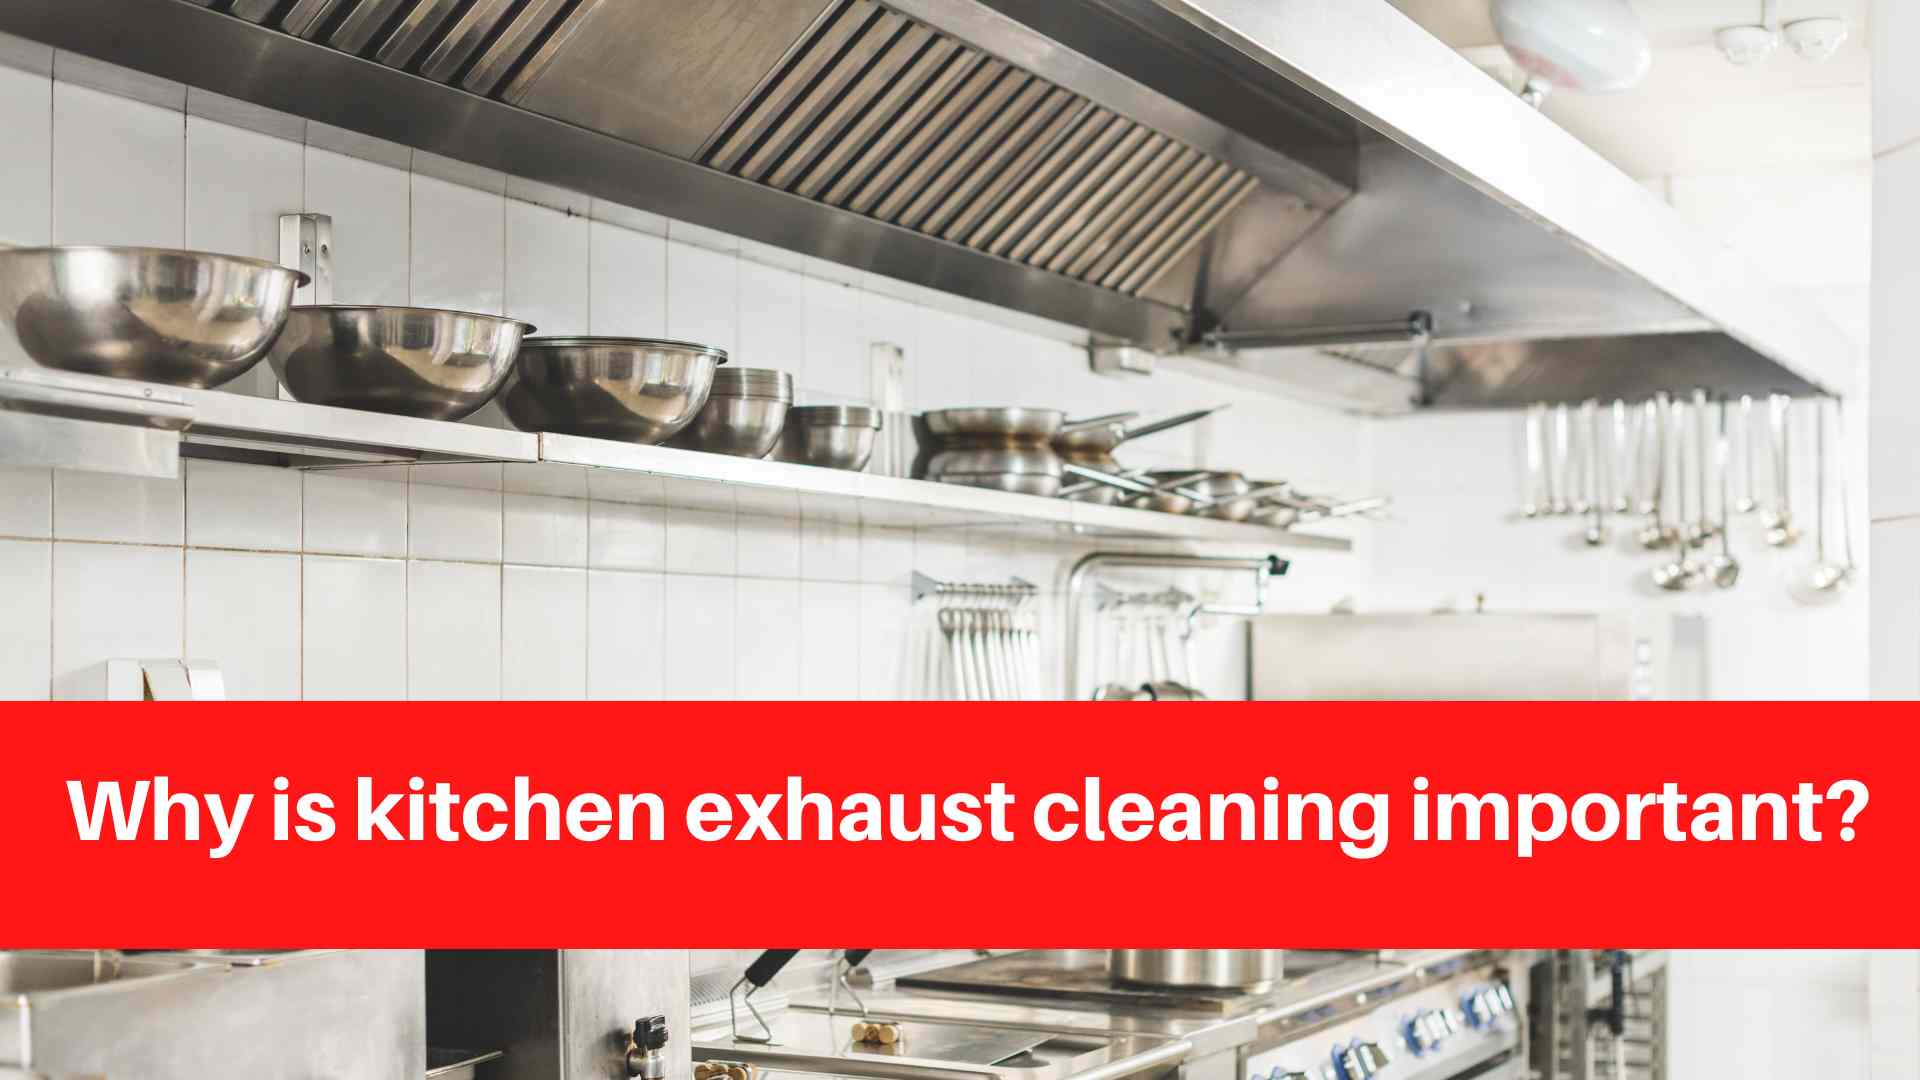 Why is kitchen exhaust cleaning important